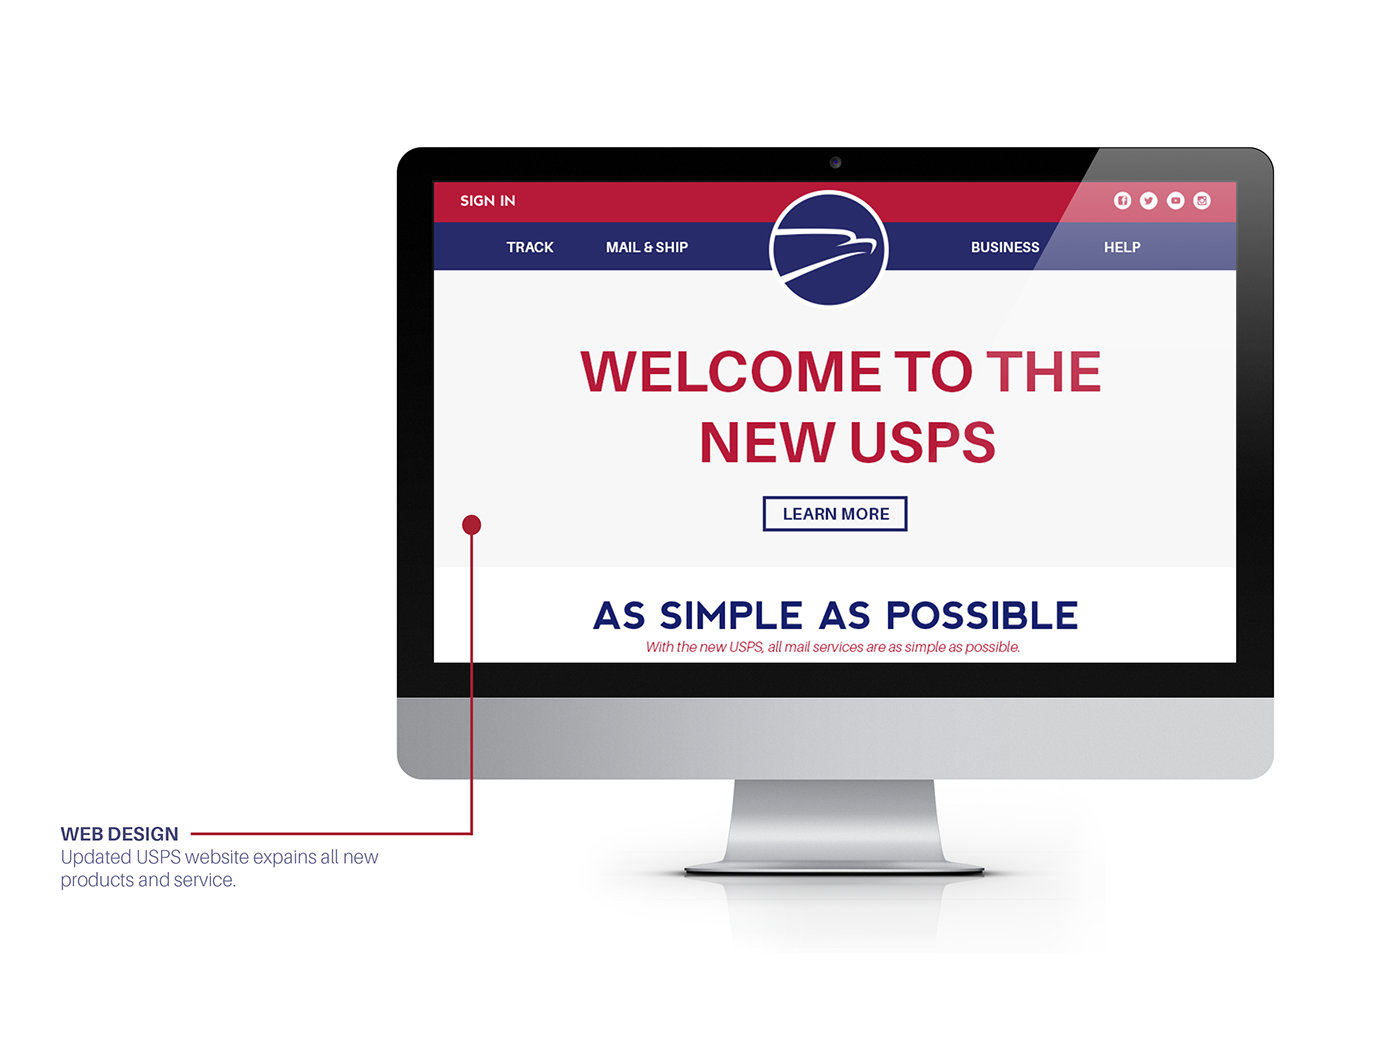 USPS post office united states United States Post brand Rebrand mail ship package shipping Interior pop up Web app Identity System